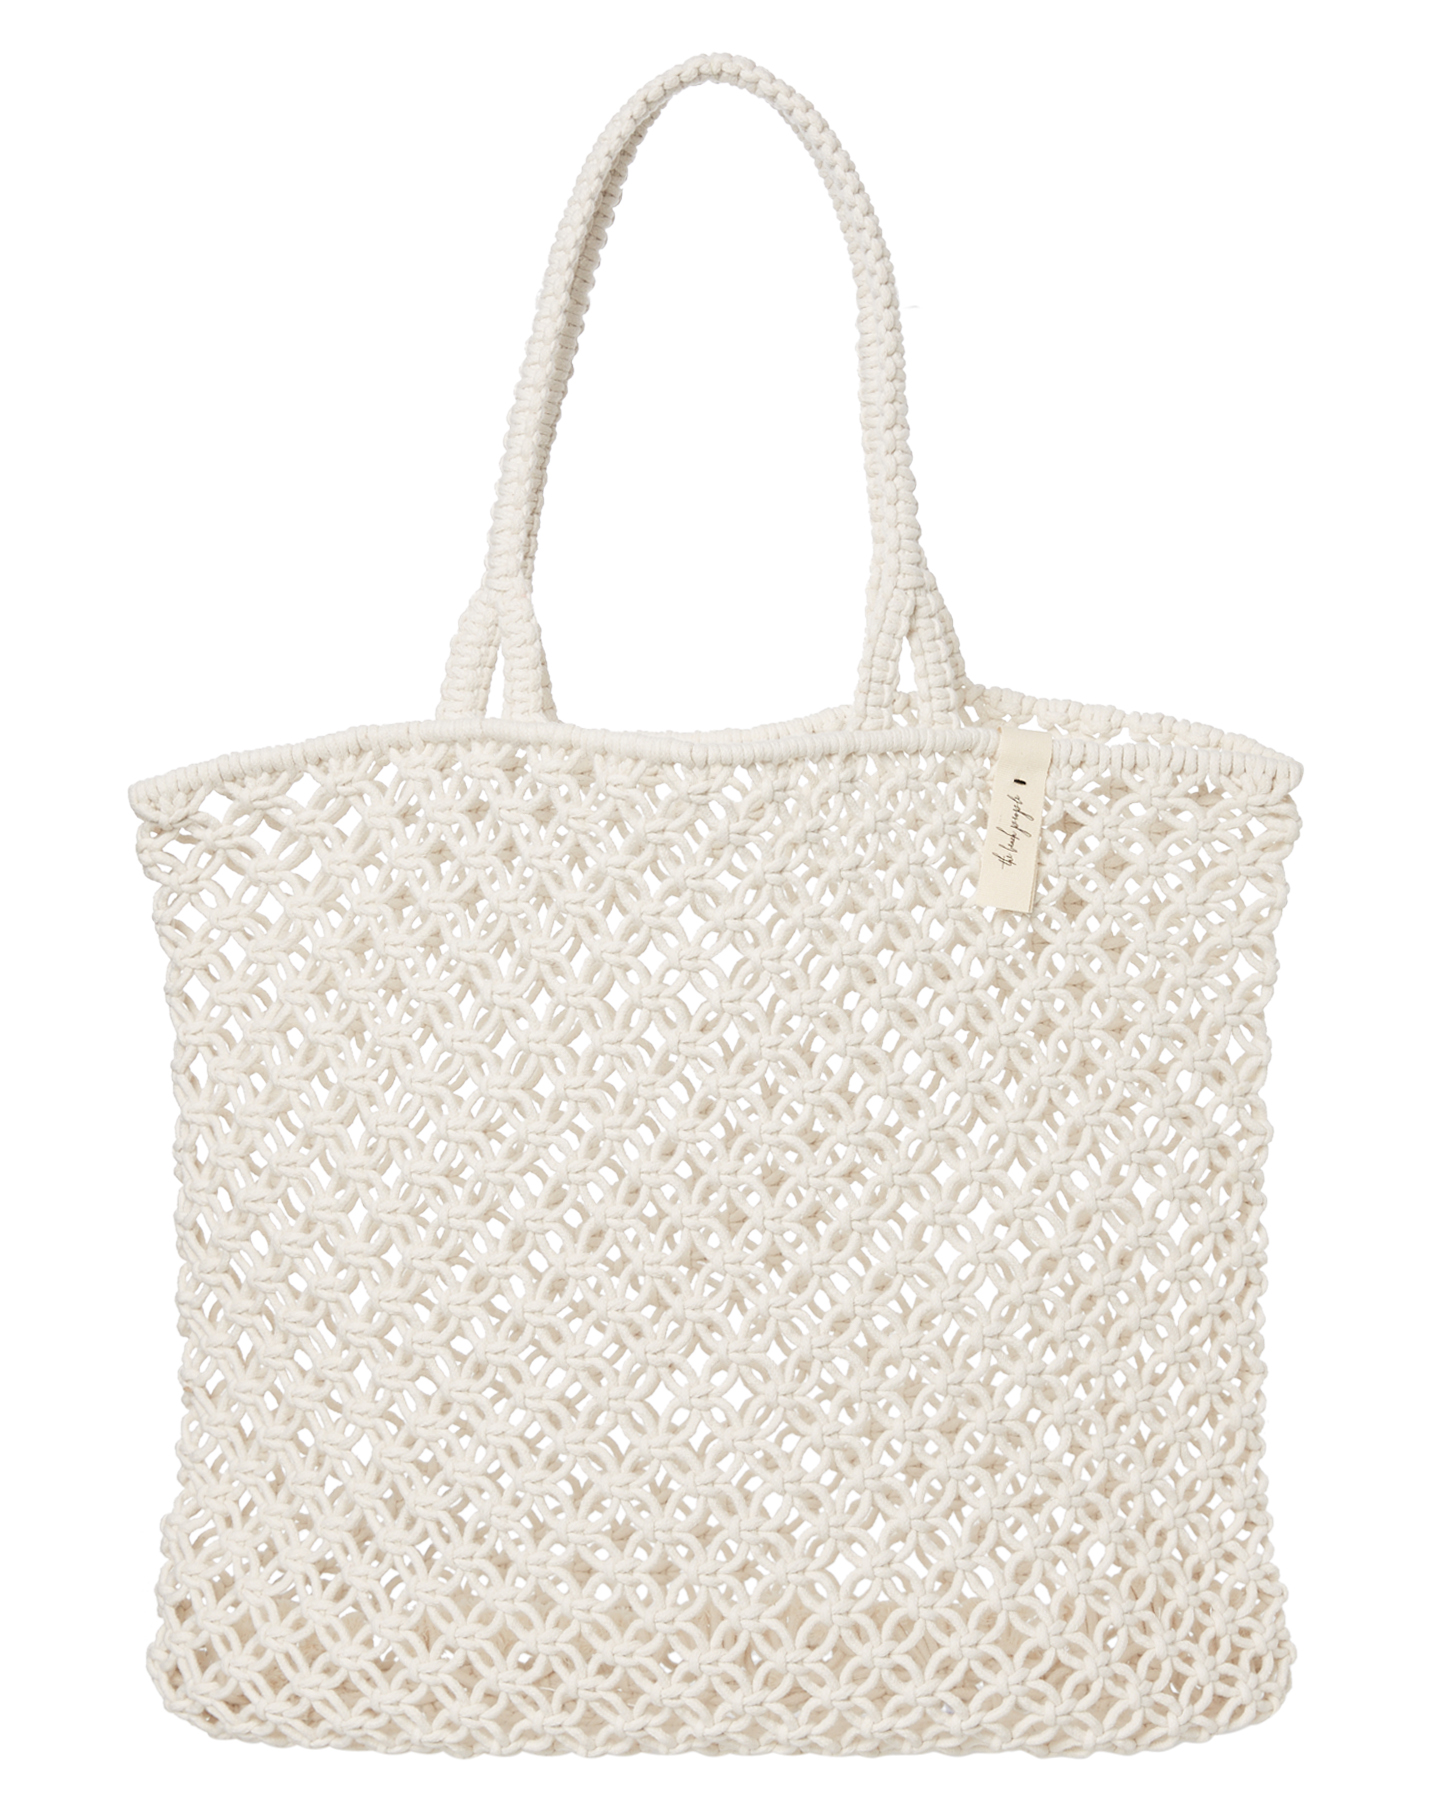 The Beach People Macrame Cotton Cord Bag - White | SurfStitch